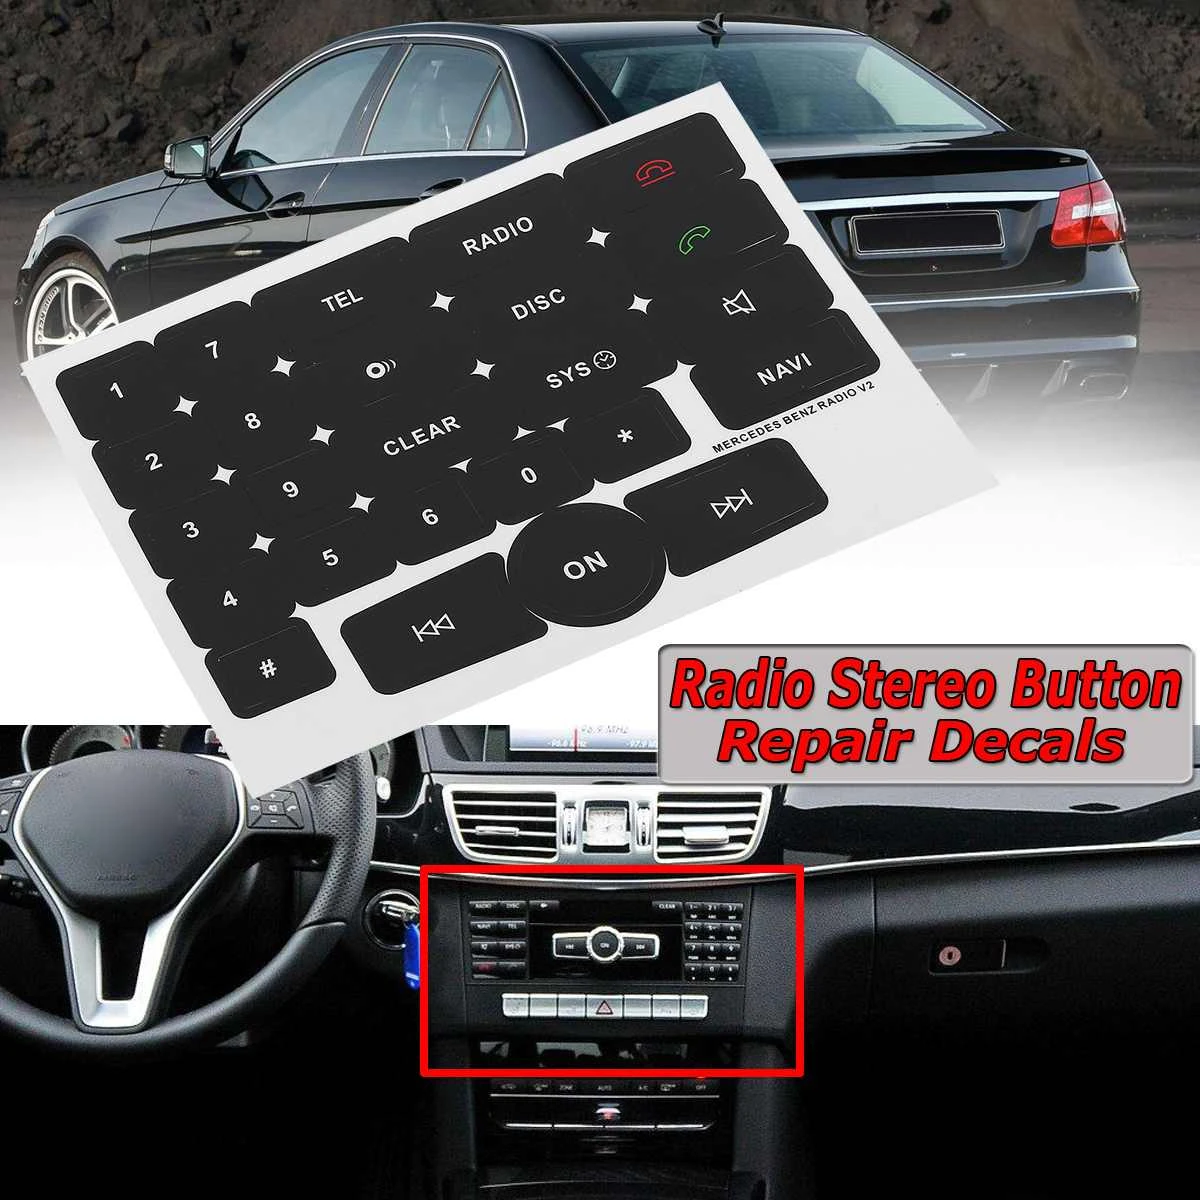 1x Black Car Media Radio Stereo Button Repair Decals Stickers Repair Car Stickers Fix Ugly Button For Mercedes For Benz Radio V2